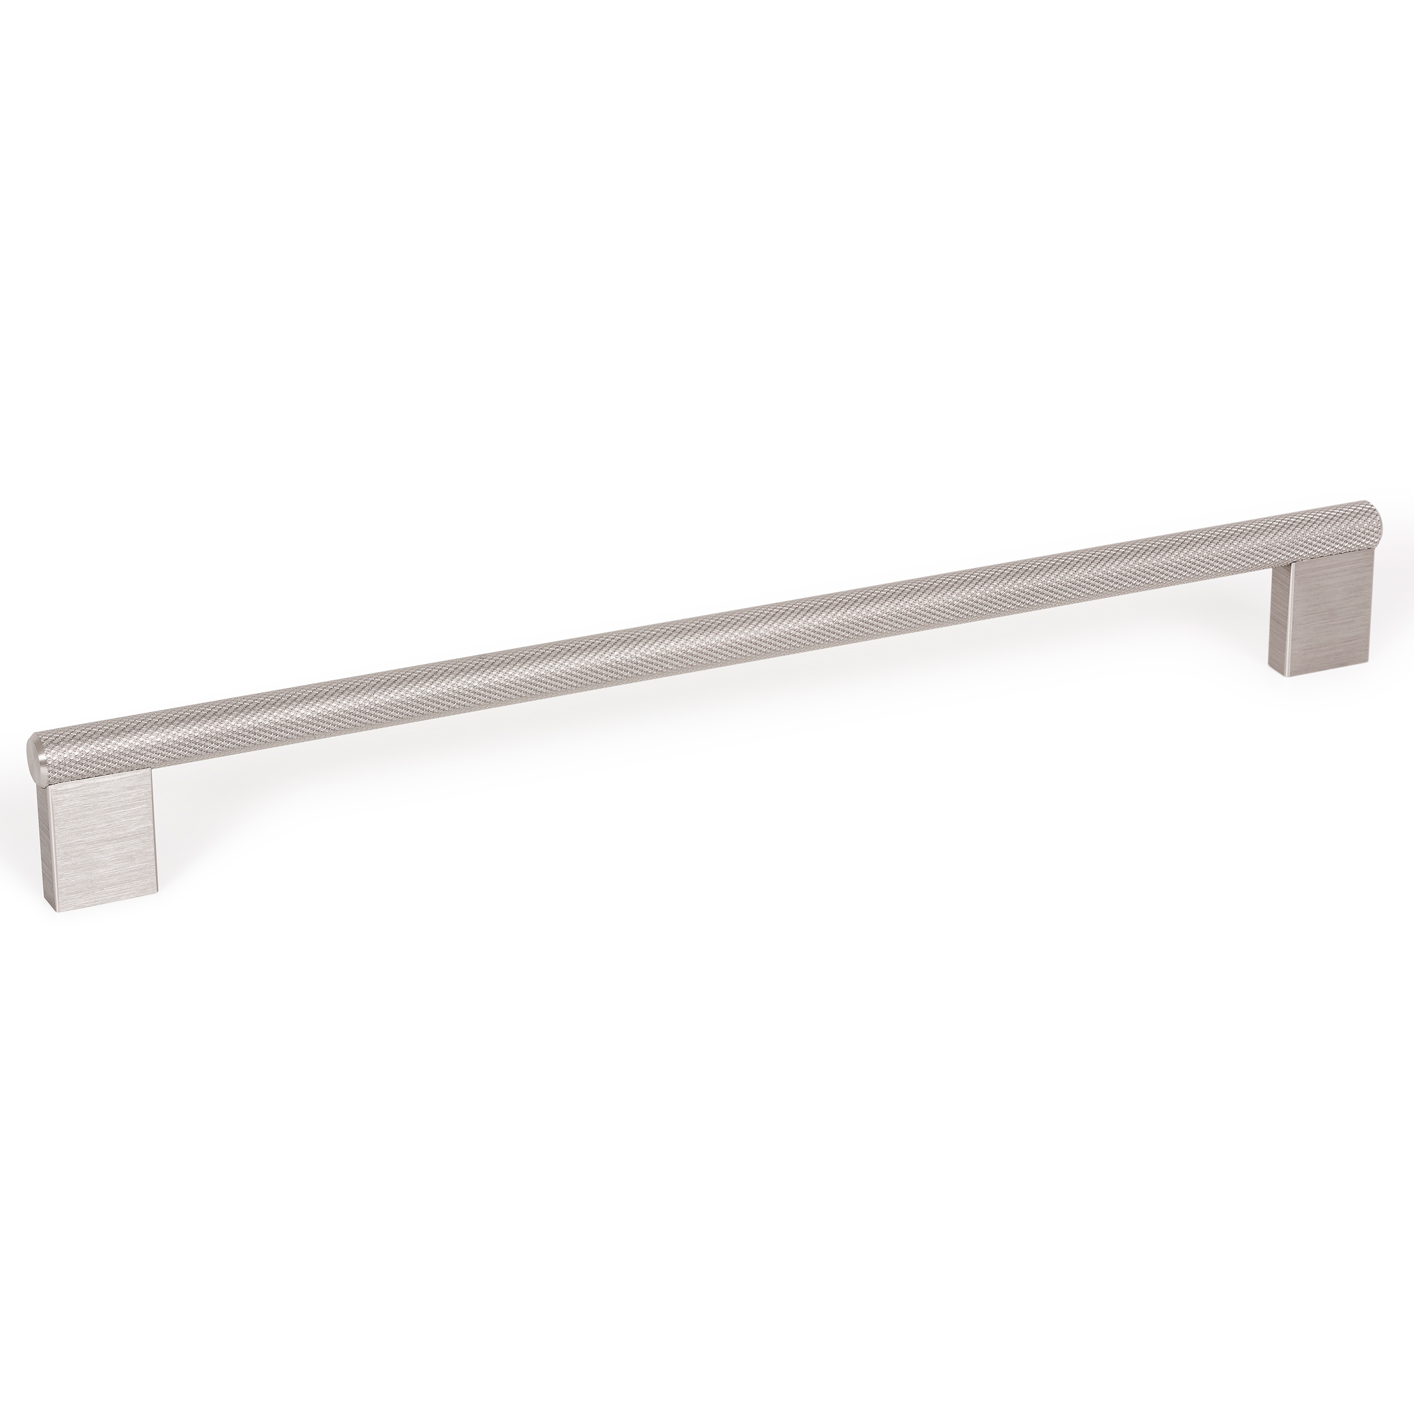 Graf Mini Pull, 256mm, Brushed Stainless Steel